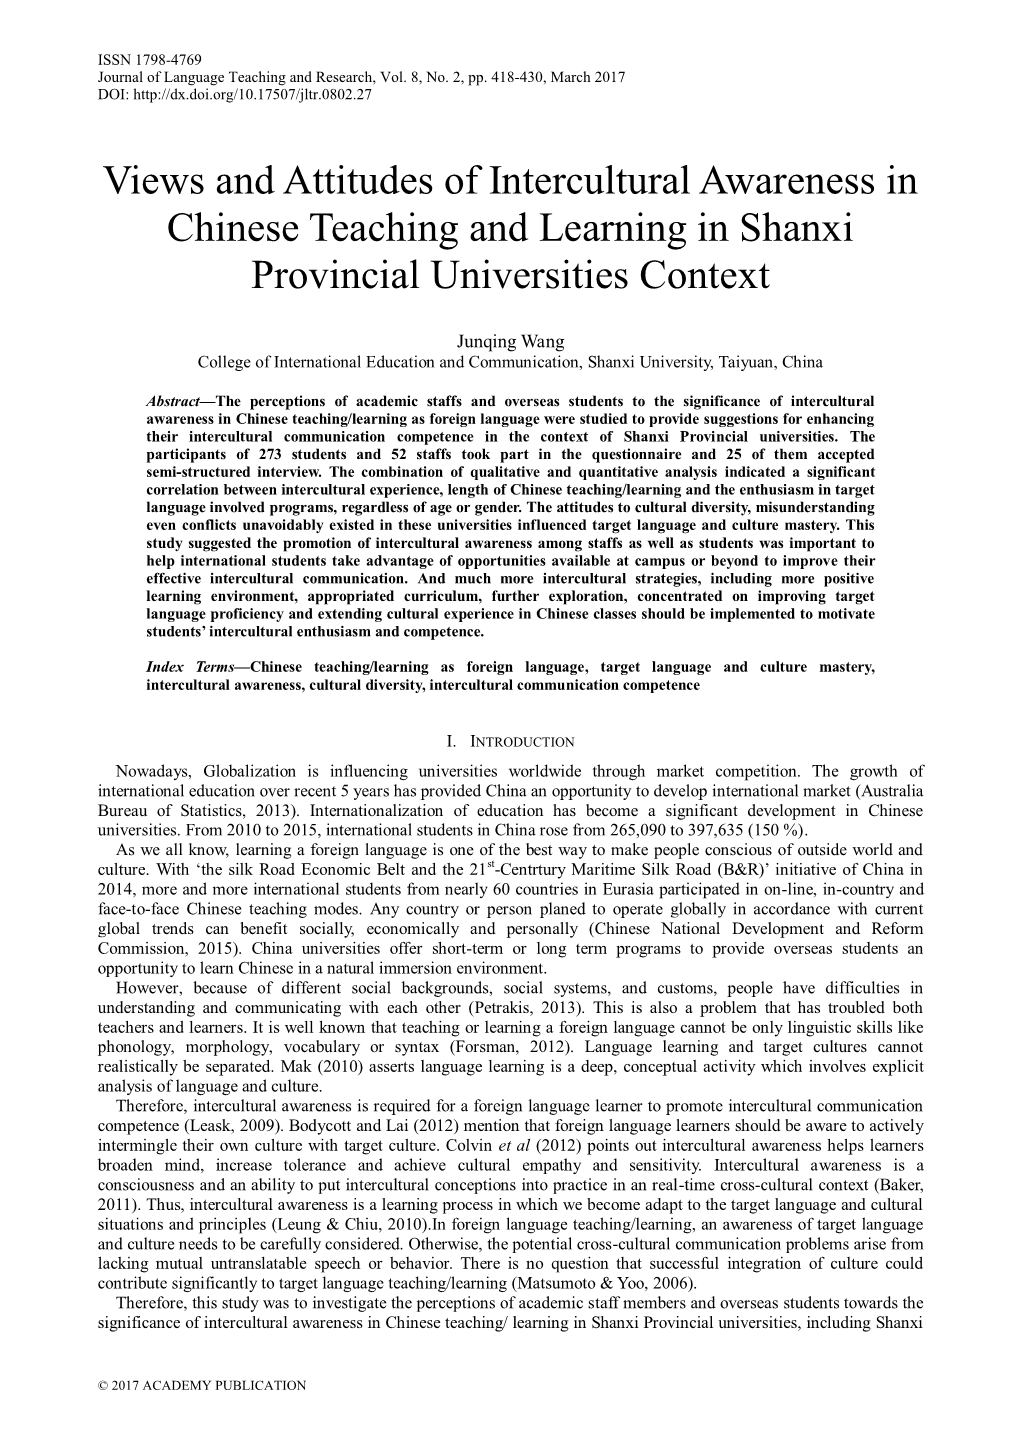 Views and Attitudes of Intercultural Awareness in Chinese Teaching and Learning in Shanxi Provincial Universities Context